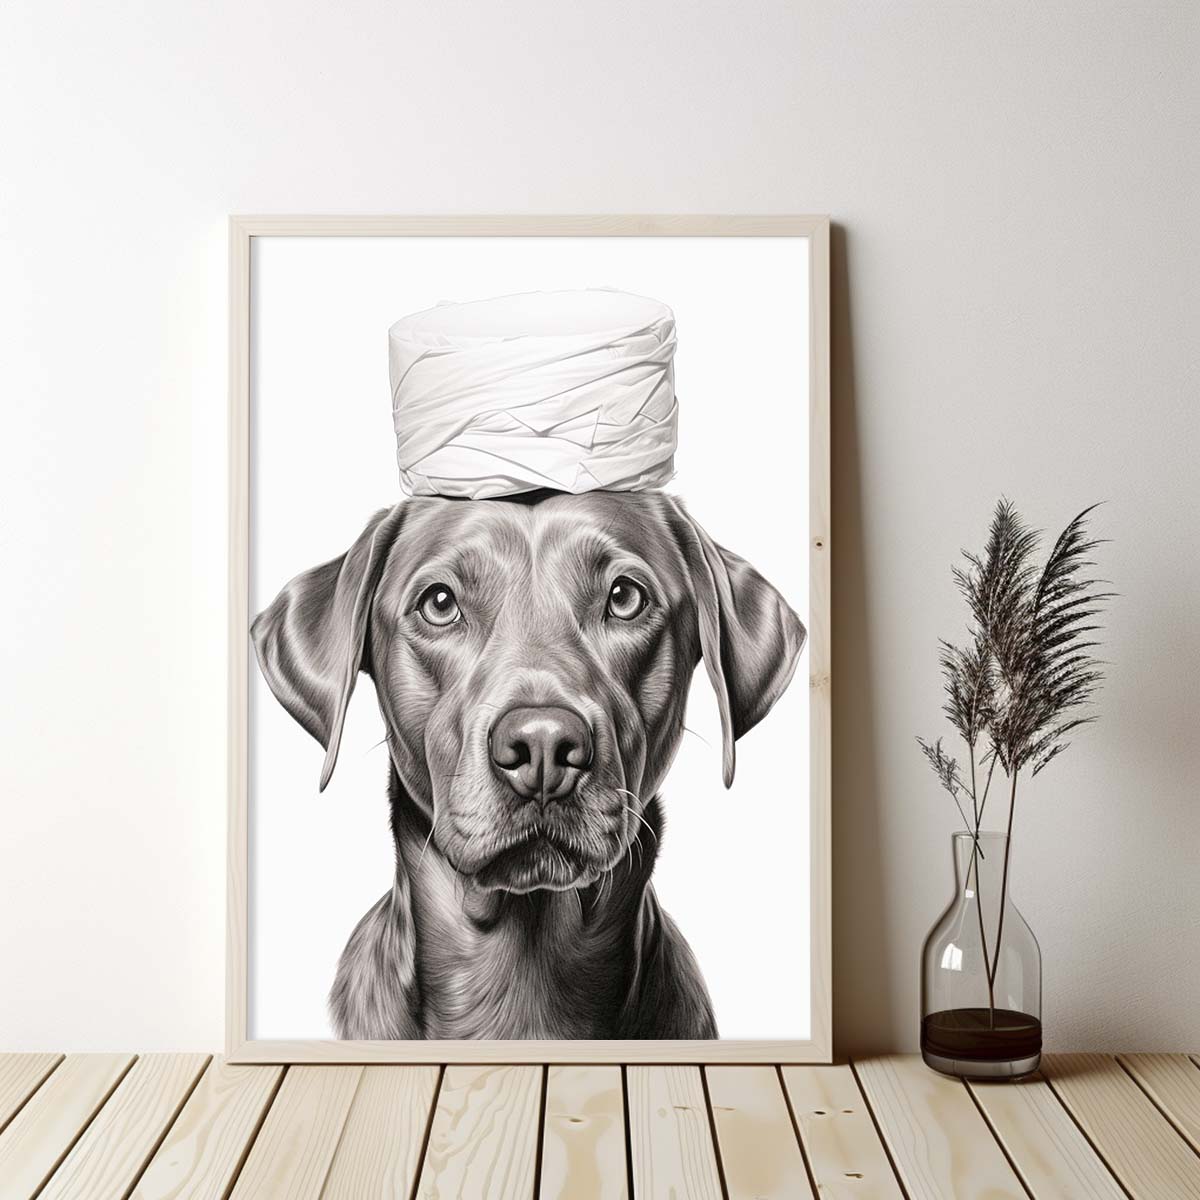 Retriever Dog With Toilet Paper, Canvas Or Poster, Funny Dog Art, Bathroom Wall Decor, Home Decor, Bathroom Wall Art, Dog Wall Decor, Animal Decor, Pet Gift, Pet Illustration, Digital Download